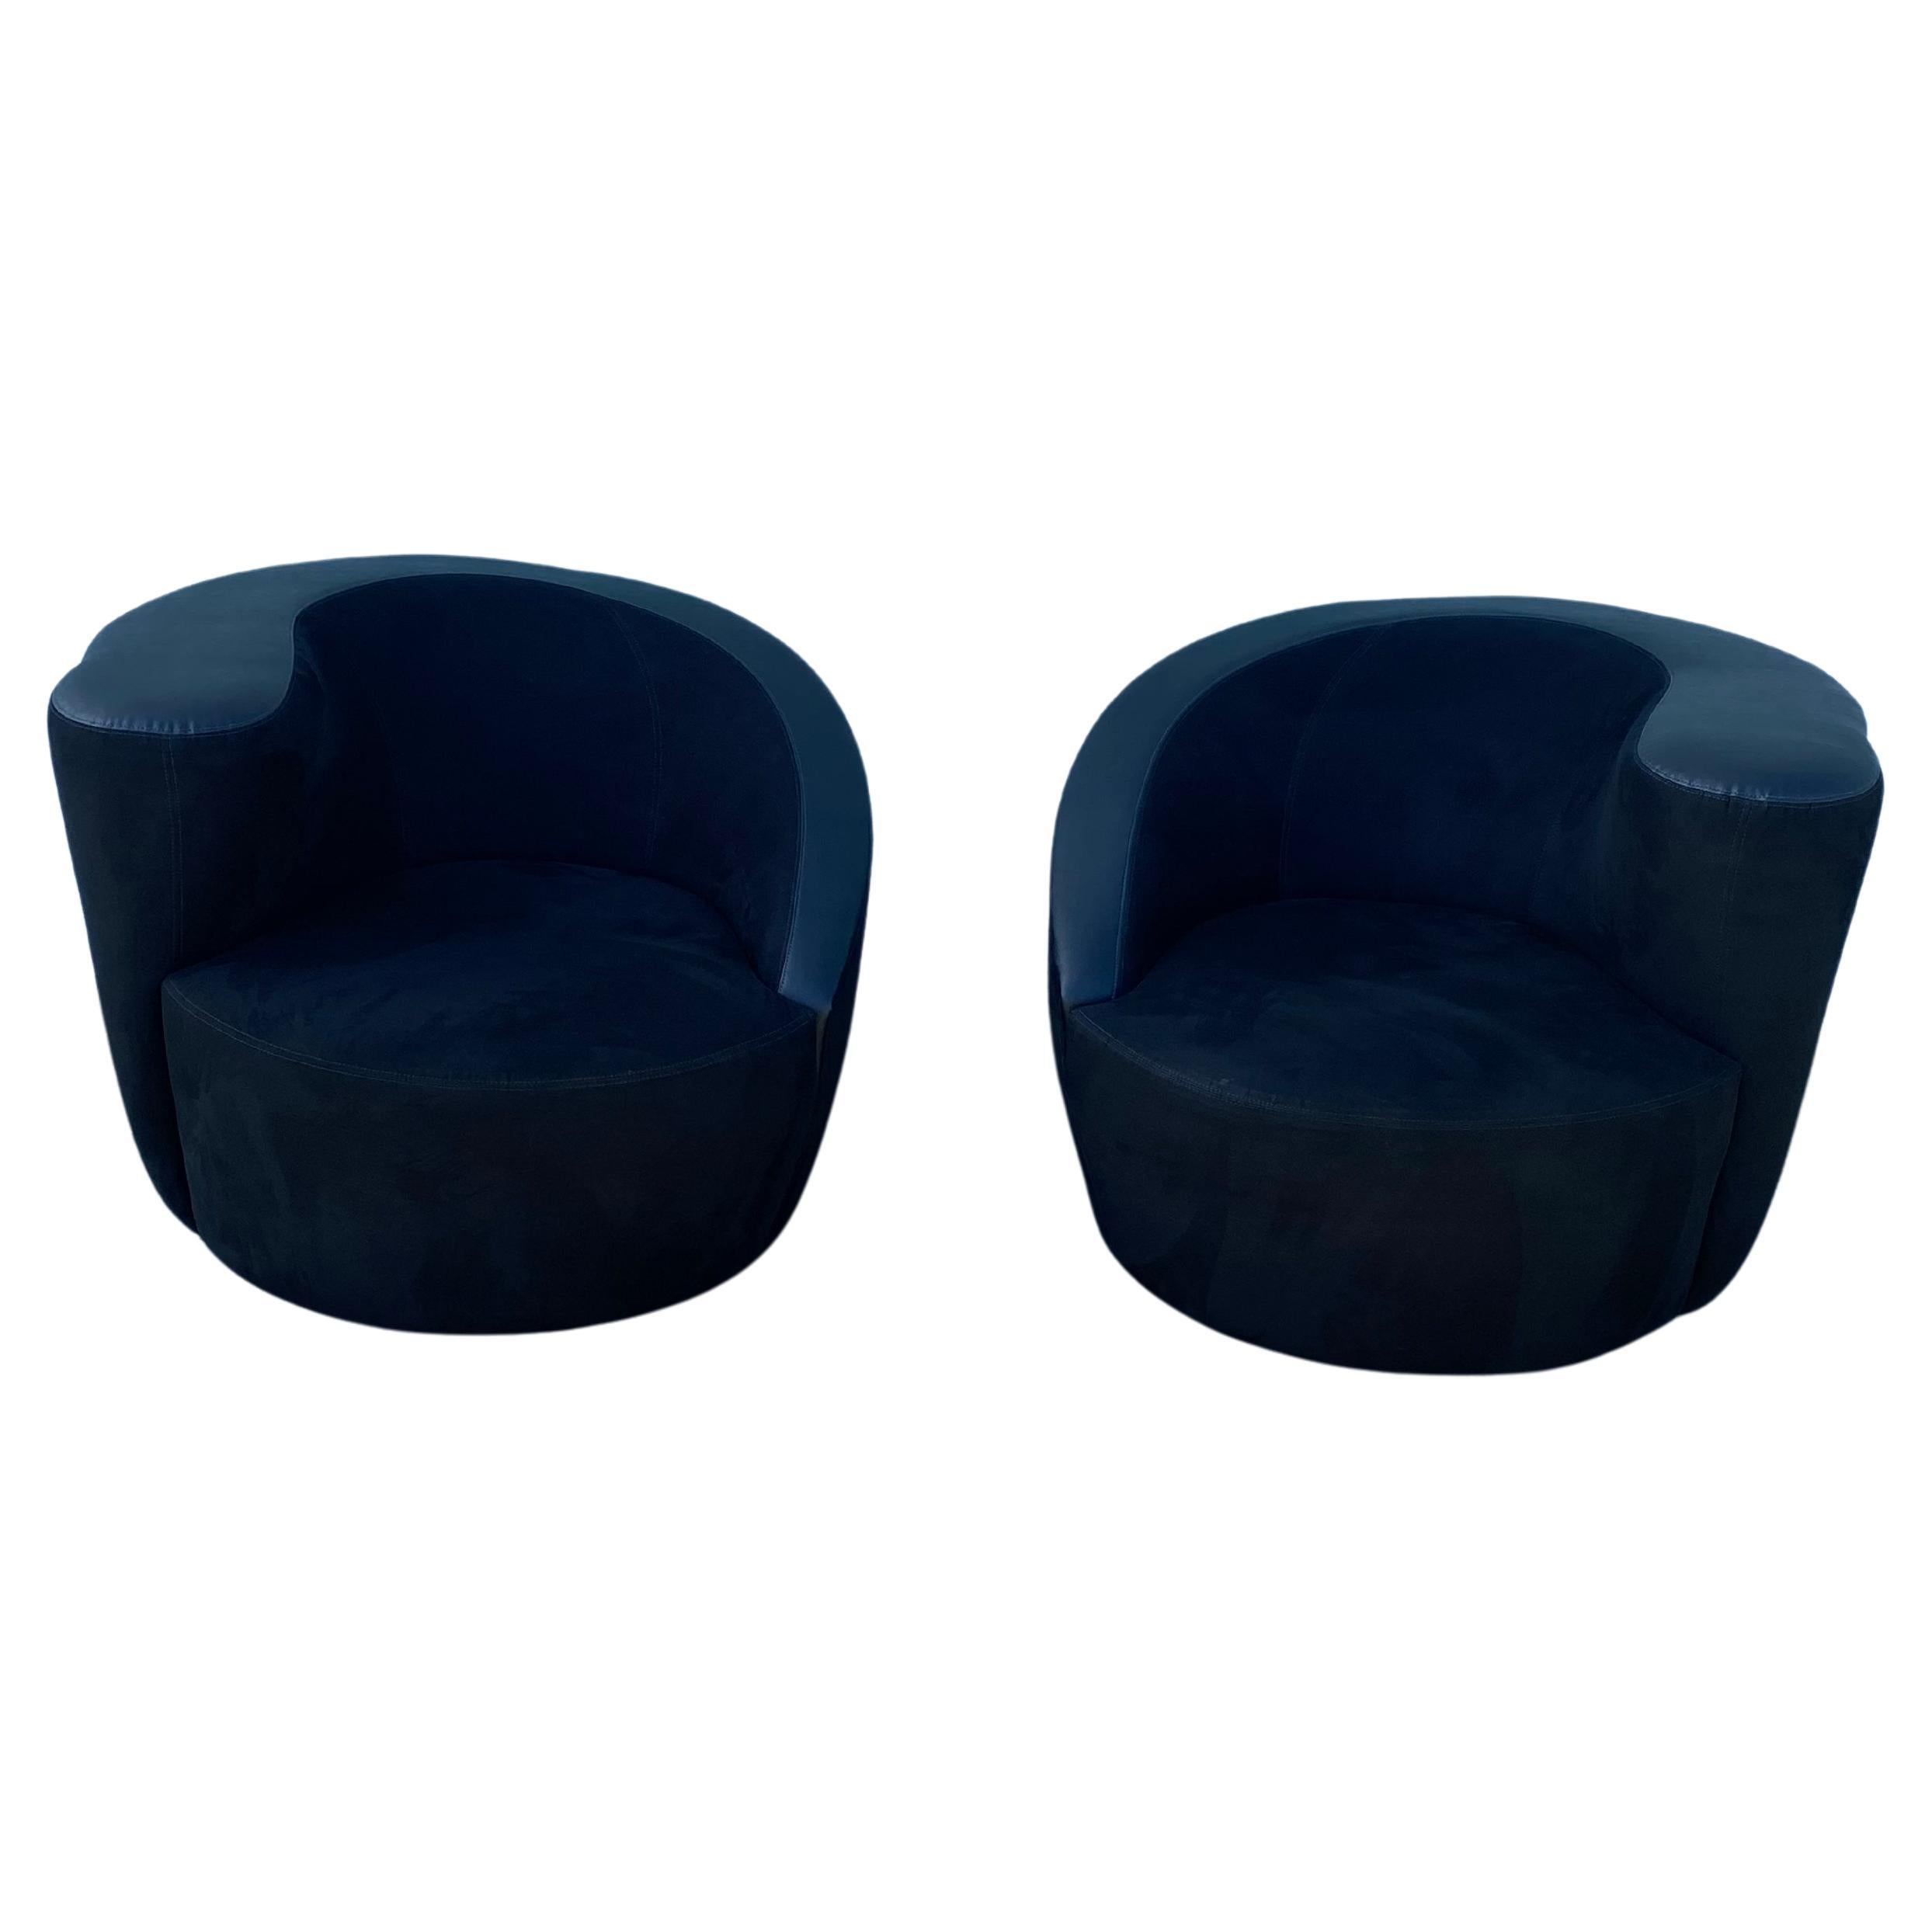 1980s Directional Kagan Black Microsuede and Leather Swivel Chairs, Set of 2 For Sale